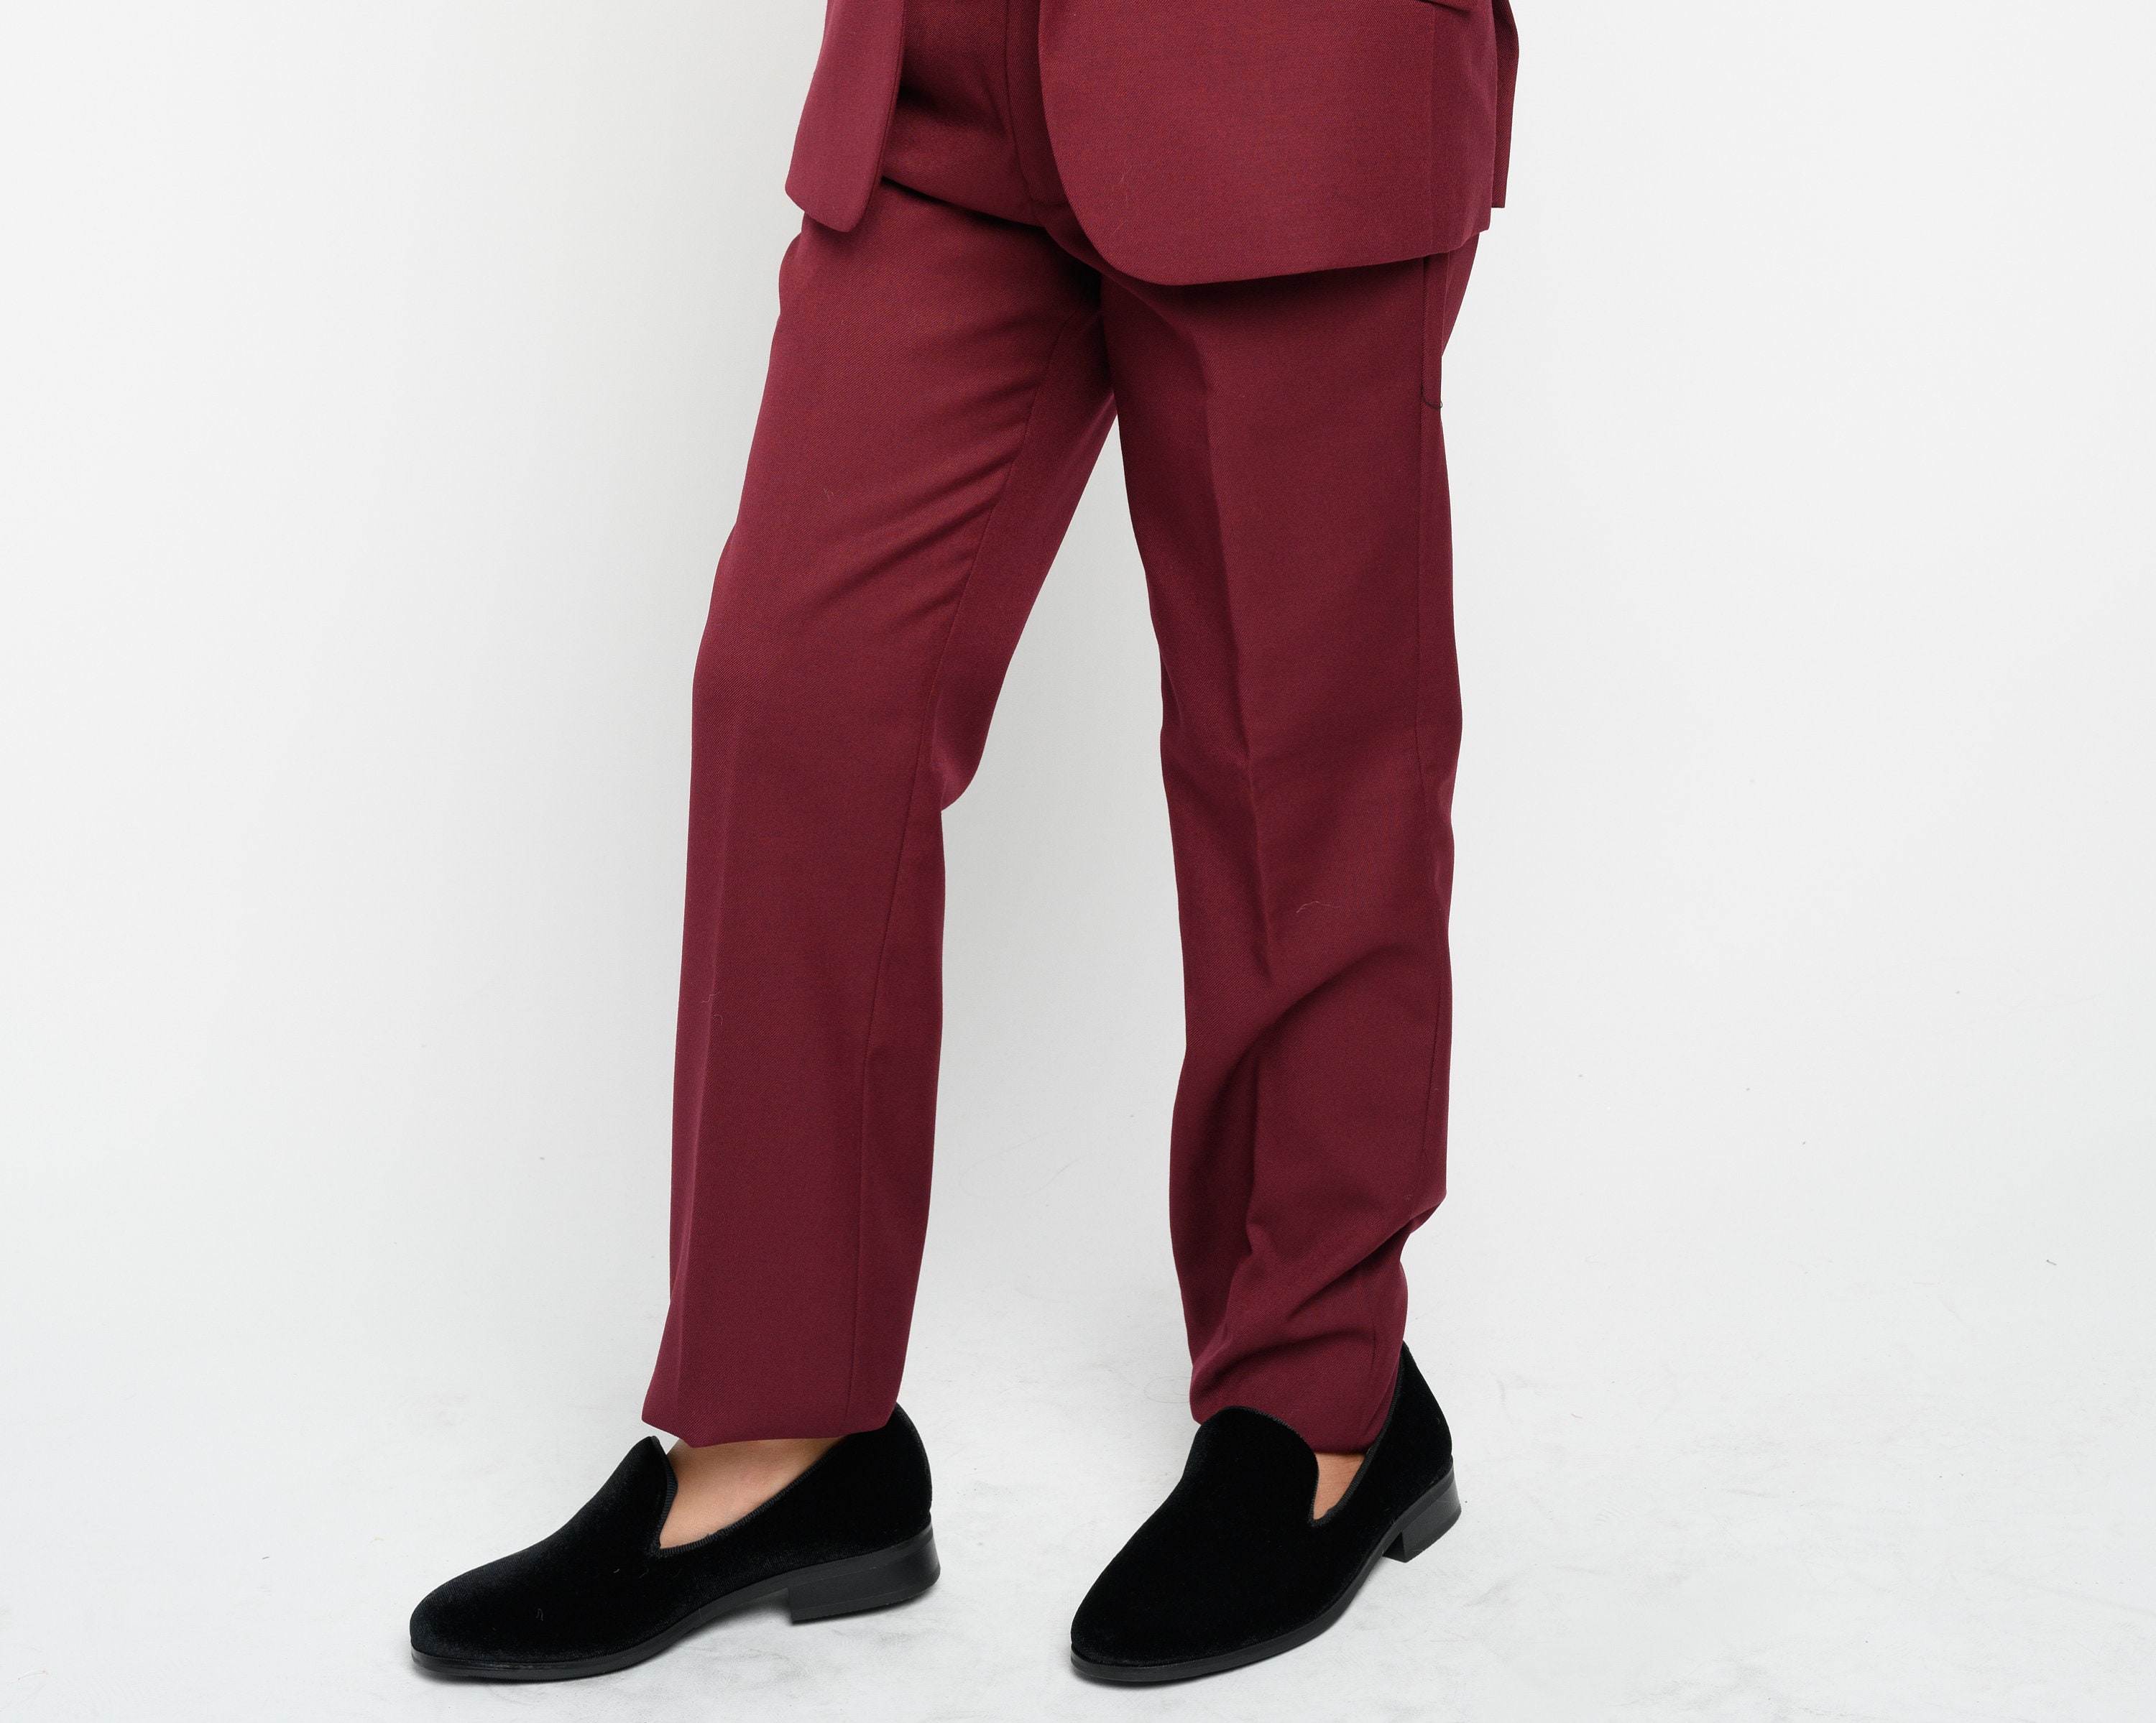 DOS AMIGOS/SCHOOL IN THE SQUARE TWILL DRESS PANTS – Student Styles